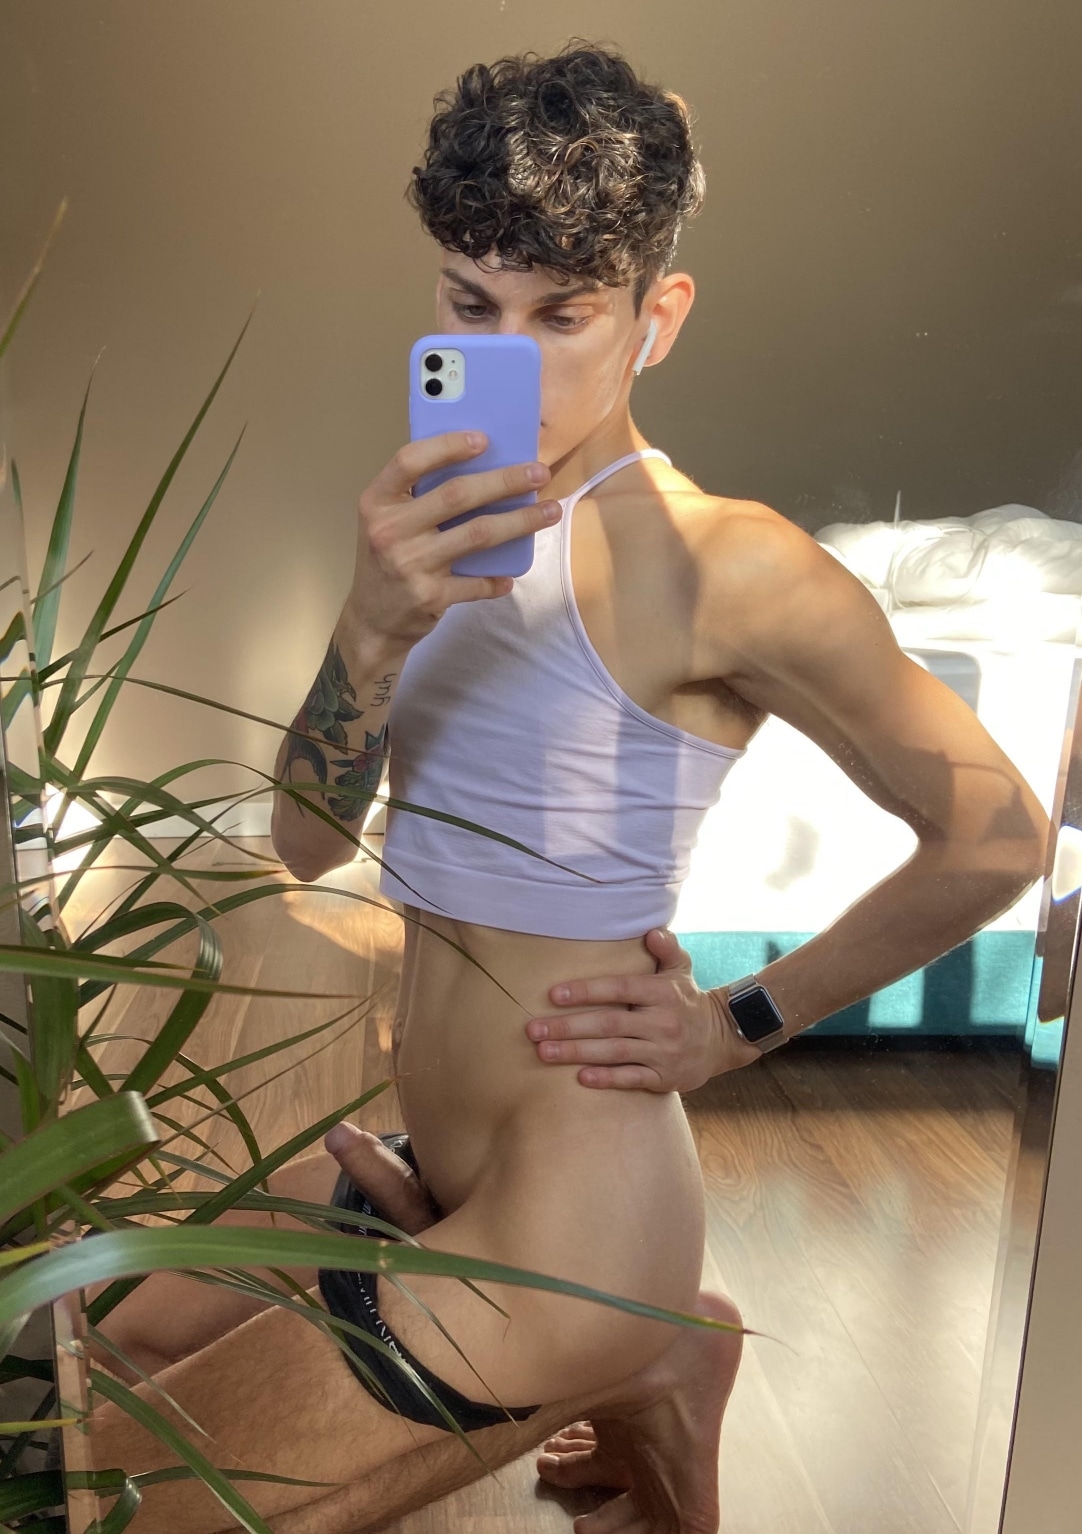 Mirror boy with his penis out